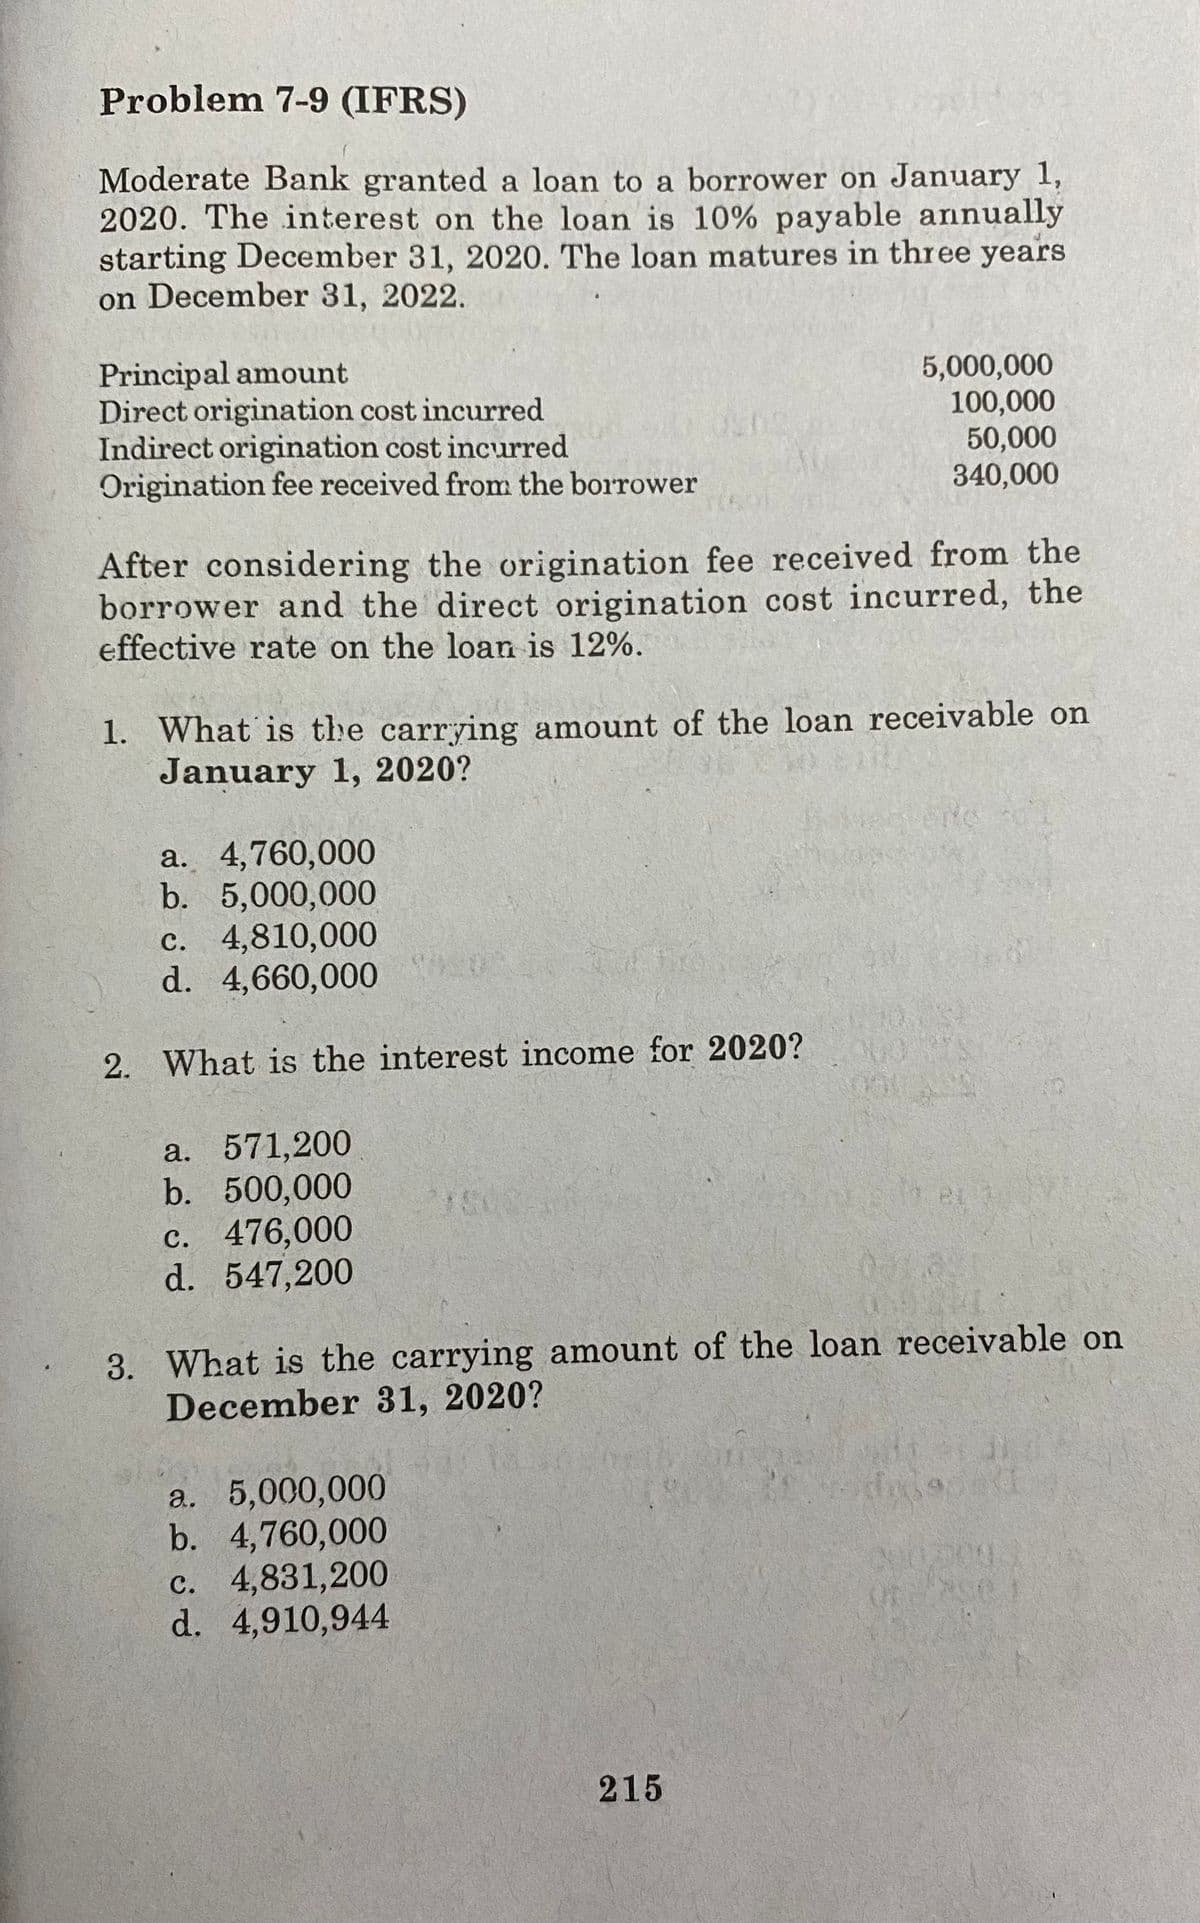 Problem 7-9 (IFRS)
Moderate Bank granted a loan to a borrower on January 1,
2020. The interest on the loan is 10% payable annually
starting December 31, 2020. The loan matures in three years
on December 31, 2022.
Principal amount
Direct origination cost incurred
Indirect origination cost incurred
Origination fee received from the borrower
5,000,000
100,000
50,000
340,000
After considering the origination fee received from the
borrower and the direct origination cost incurred, the
effective rate on the loa is 12%.
1. What is the carrying amount of the loan receivable on
January 1, 2020?
a. 4,760,000
b. 5,000,000
c. 4,810,000
d. 4,660,000
2. What is the interest income for 2020?
a. 571,200
b. 500,000
c. 476,000
d. 547,200
3. What is the carrying amount of the loan receivable on
December 31, 2020?
a. 5,000,000
b. 4,760,000
c. 4,831,200
d. 4,910,944
तत
215
